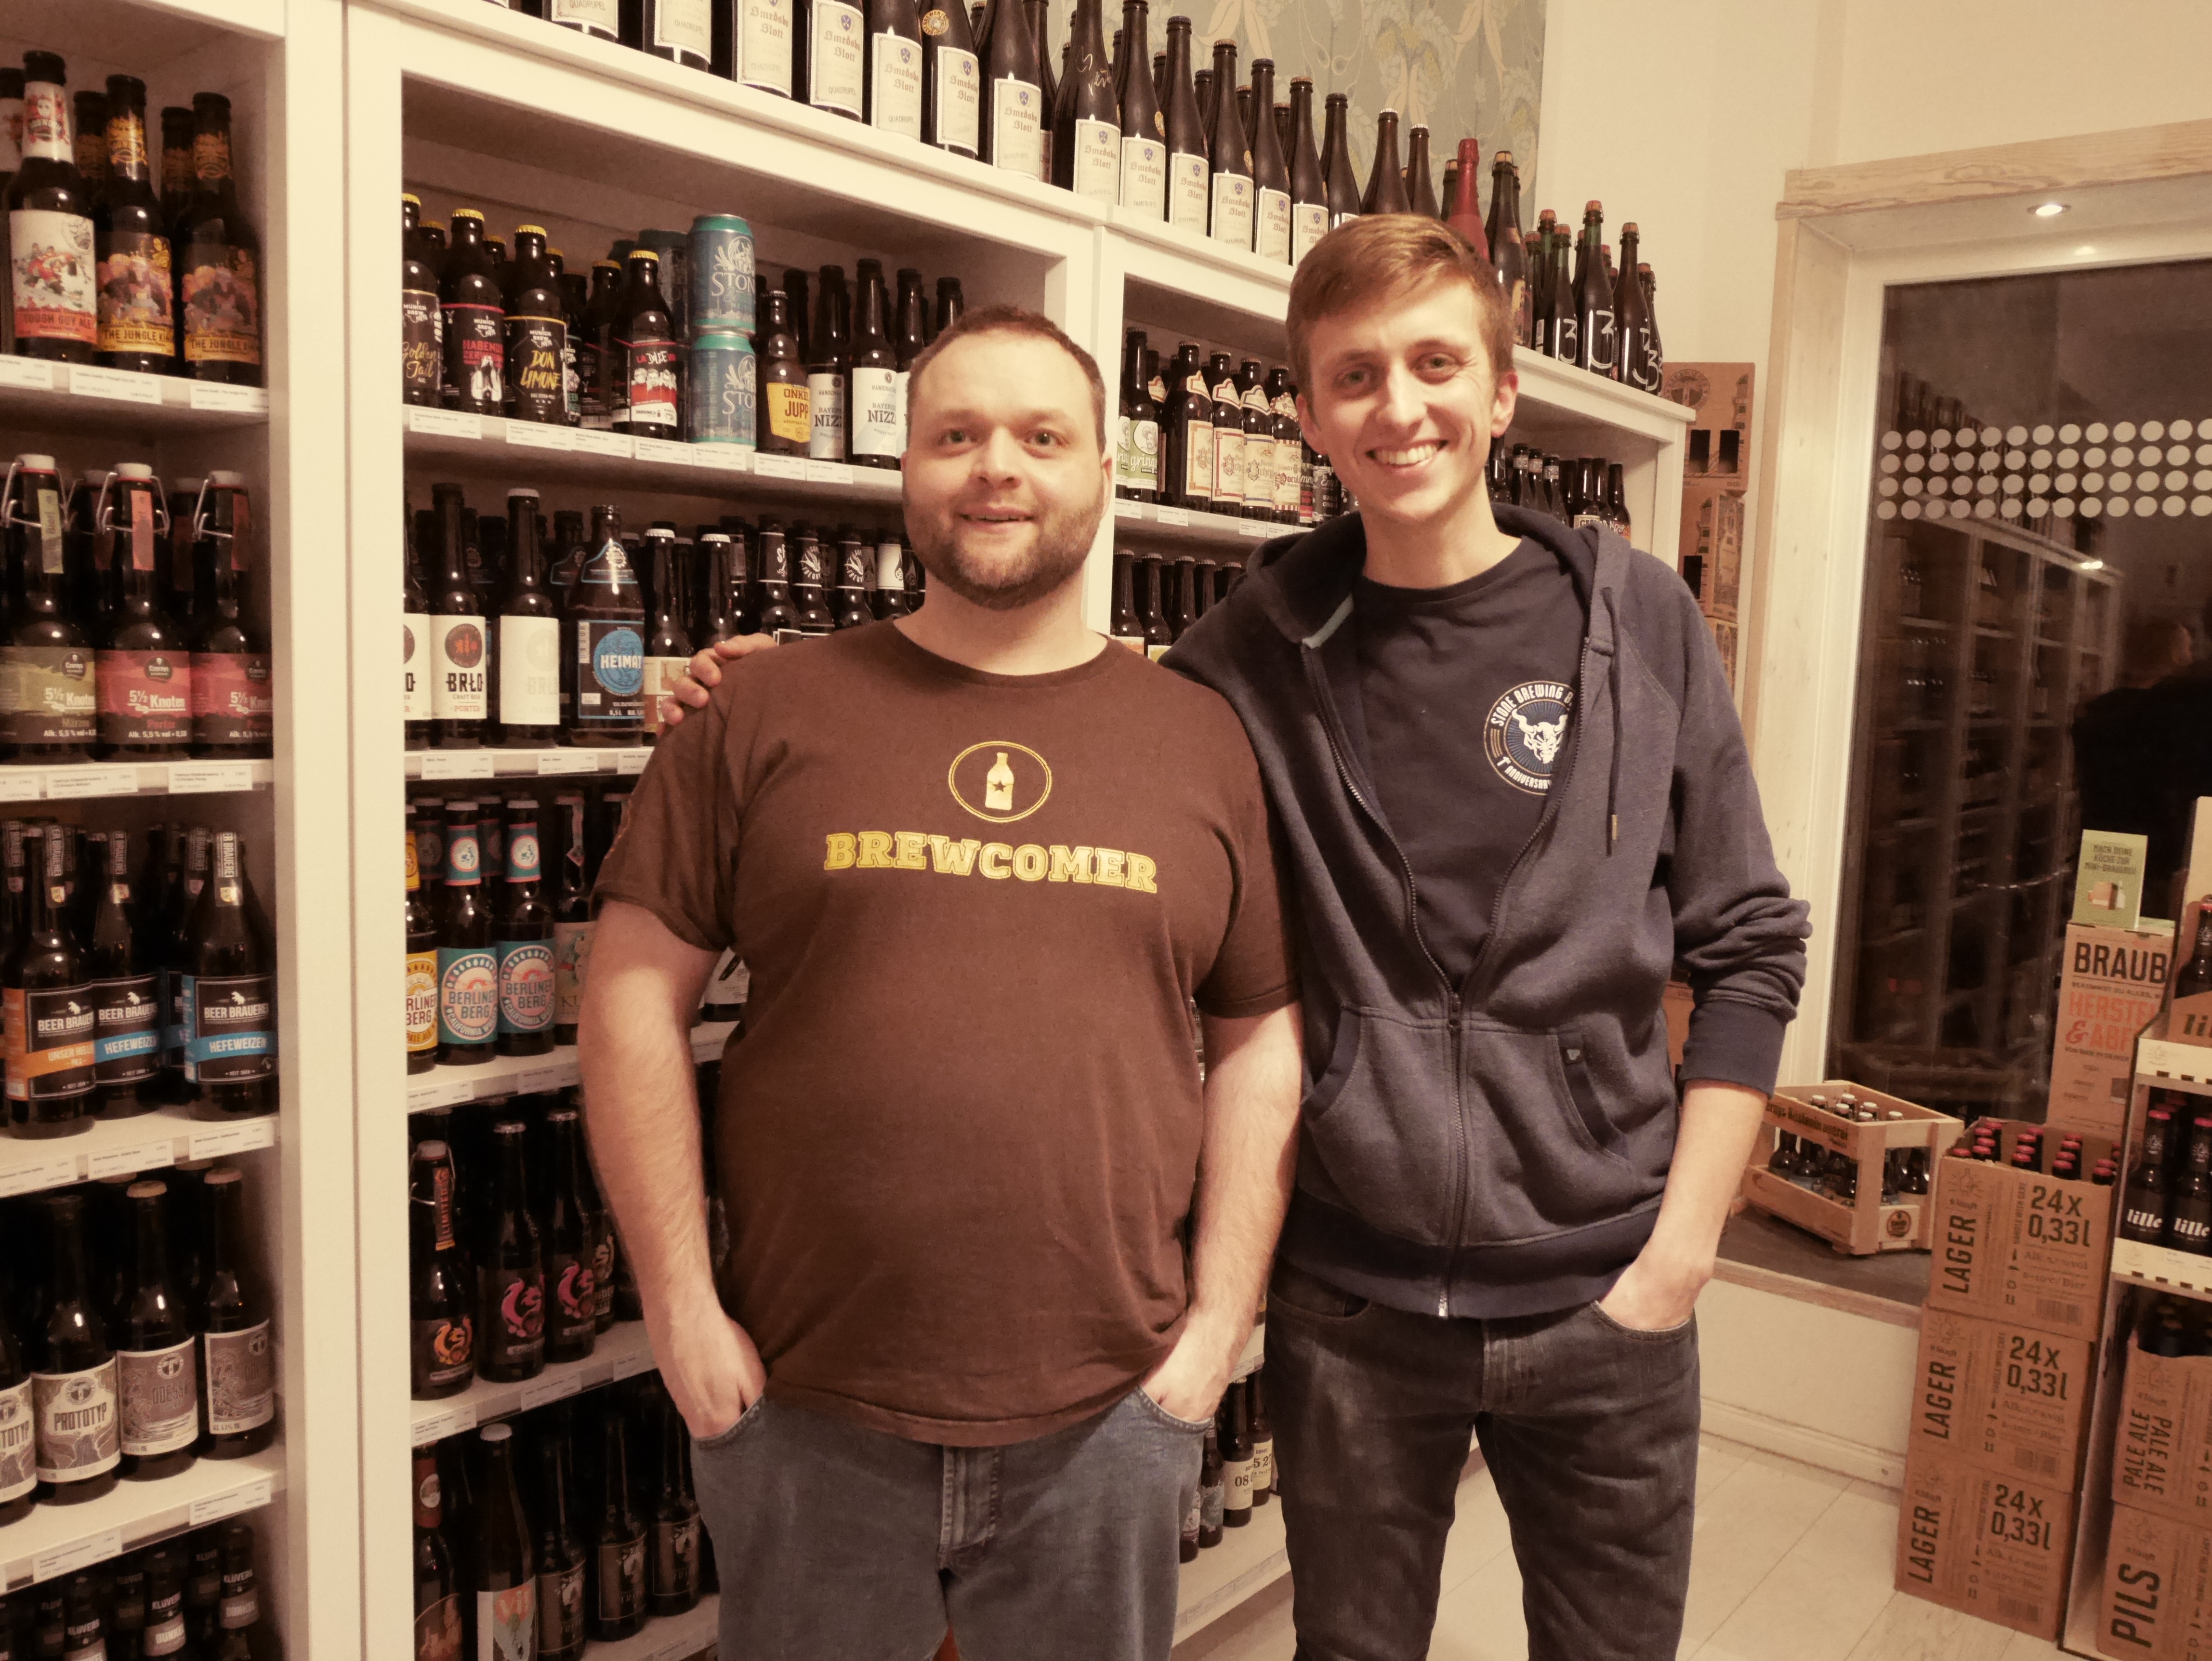 Folge #4, 6.02.18: Expedition Craft Beer. Zu Besuch bei Brewcomer in Kiel post thumbnail image